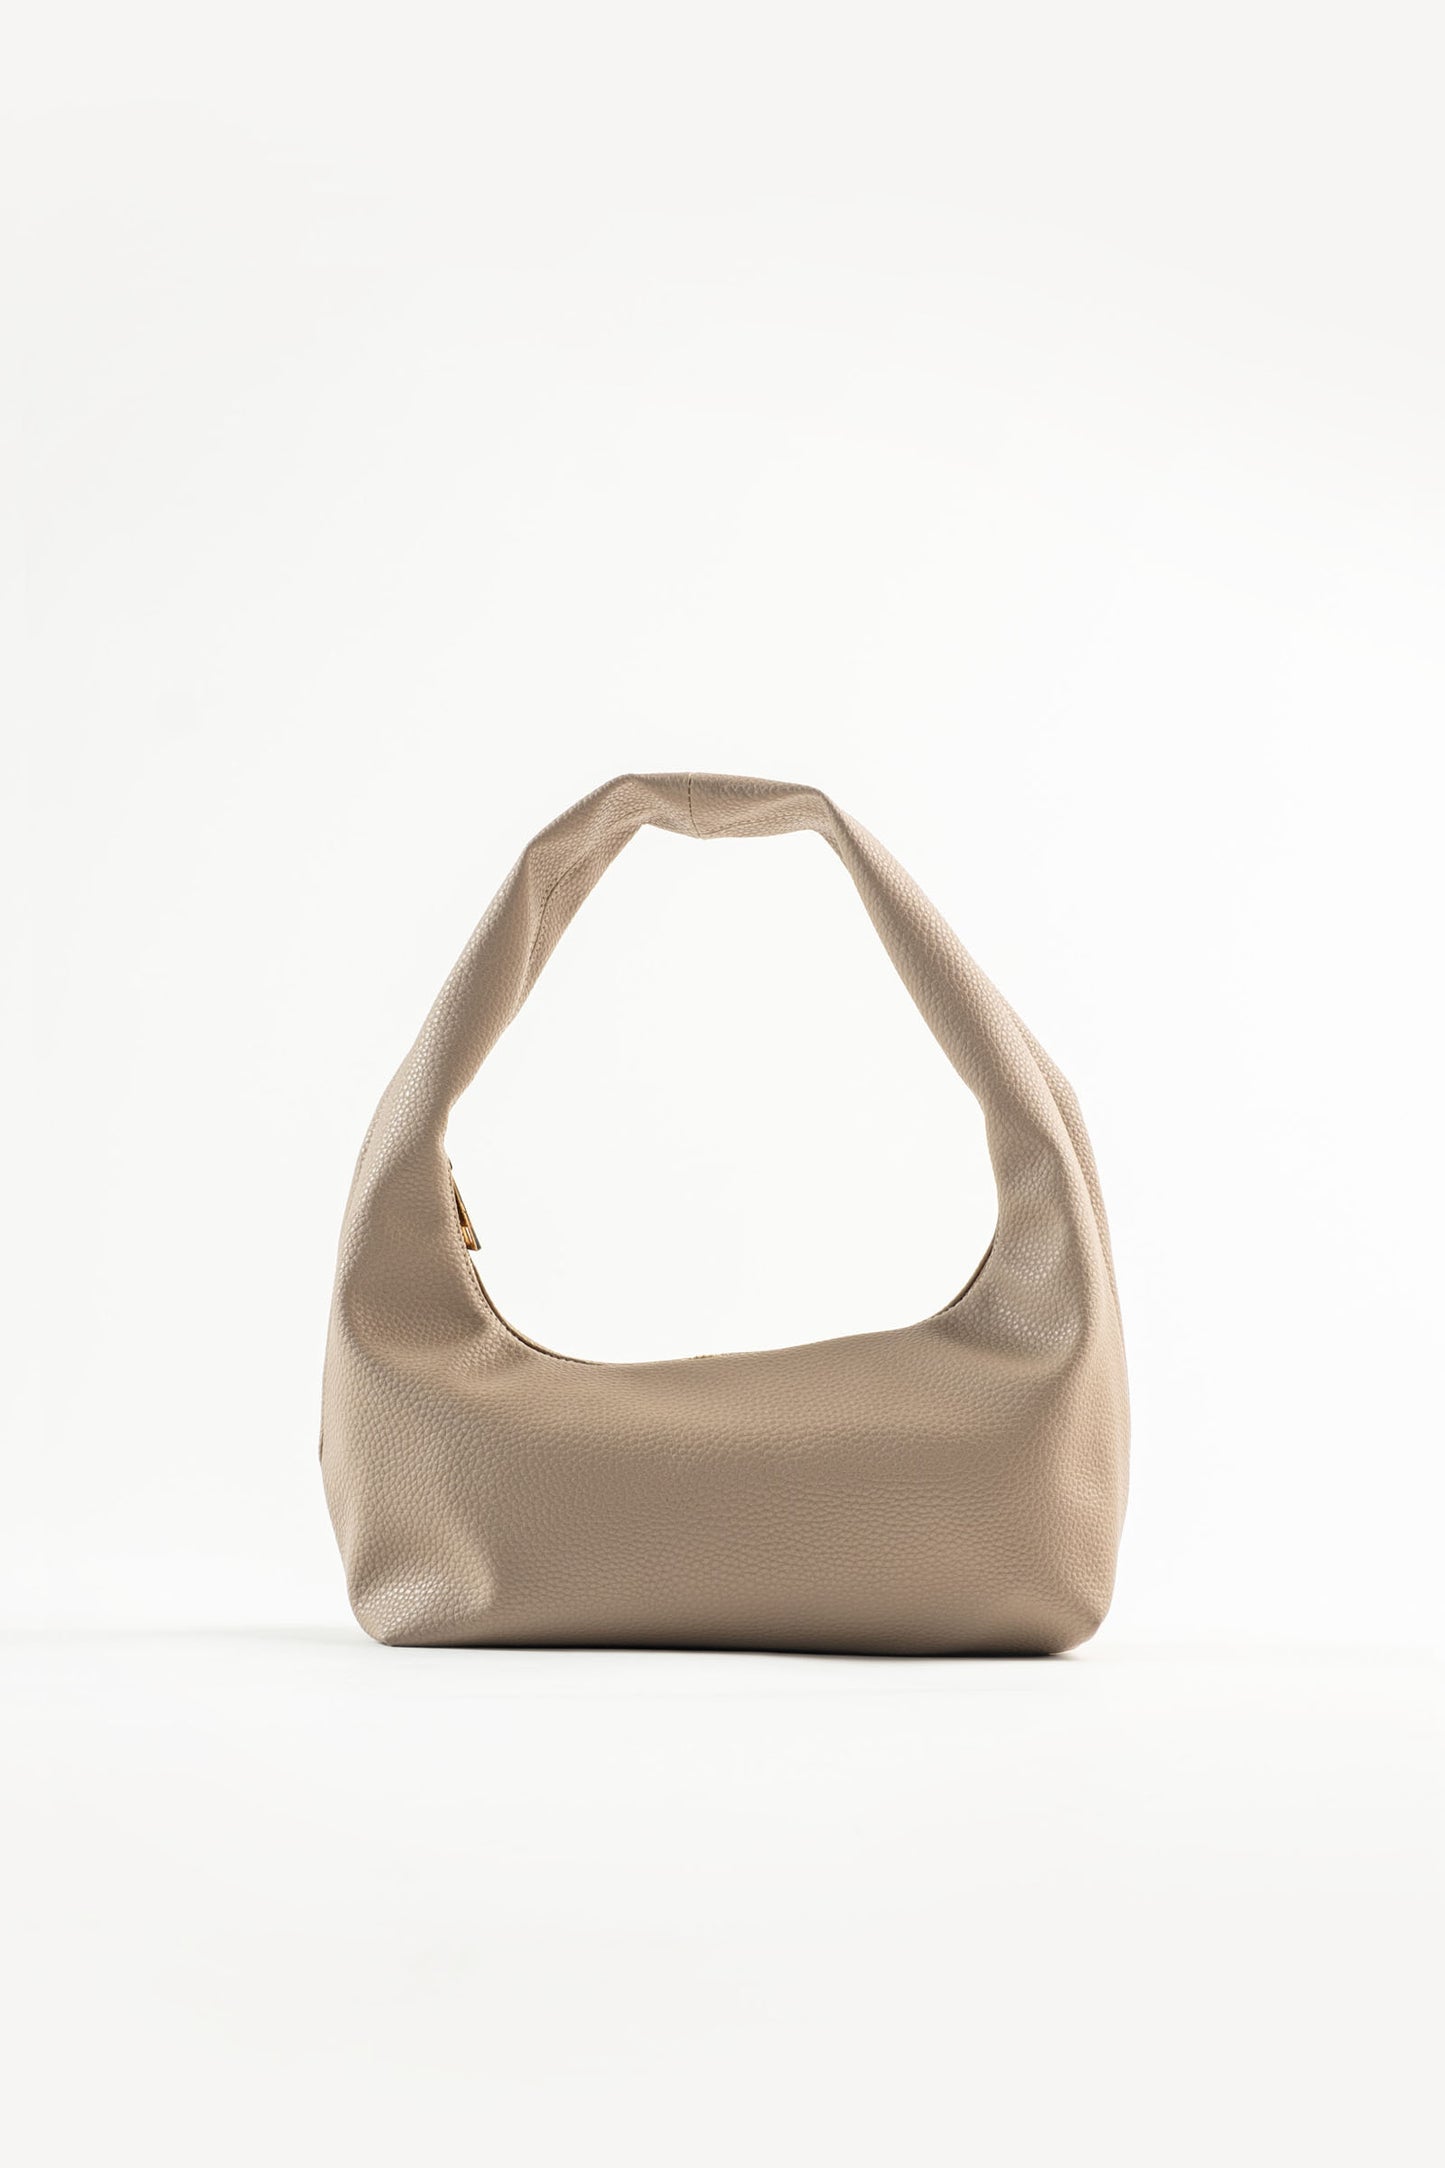 Small Hobo Bag in Taupe (On Hand)